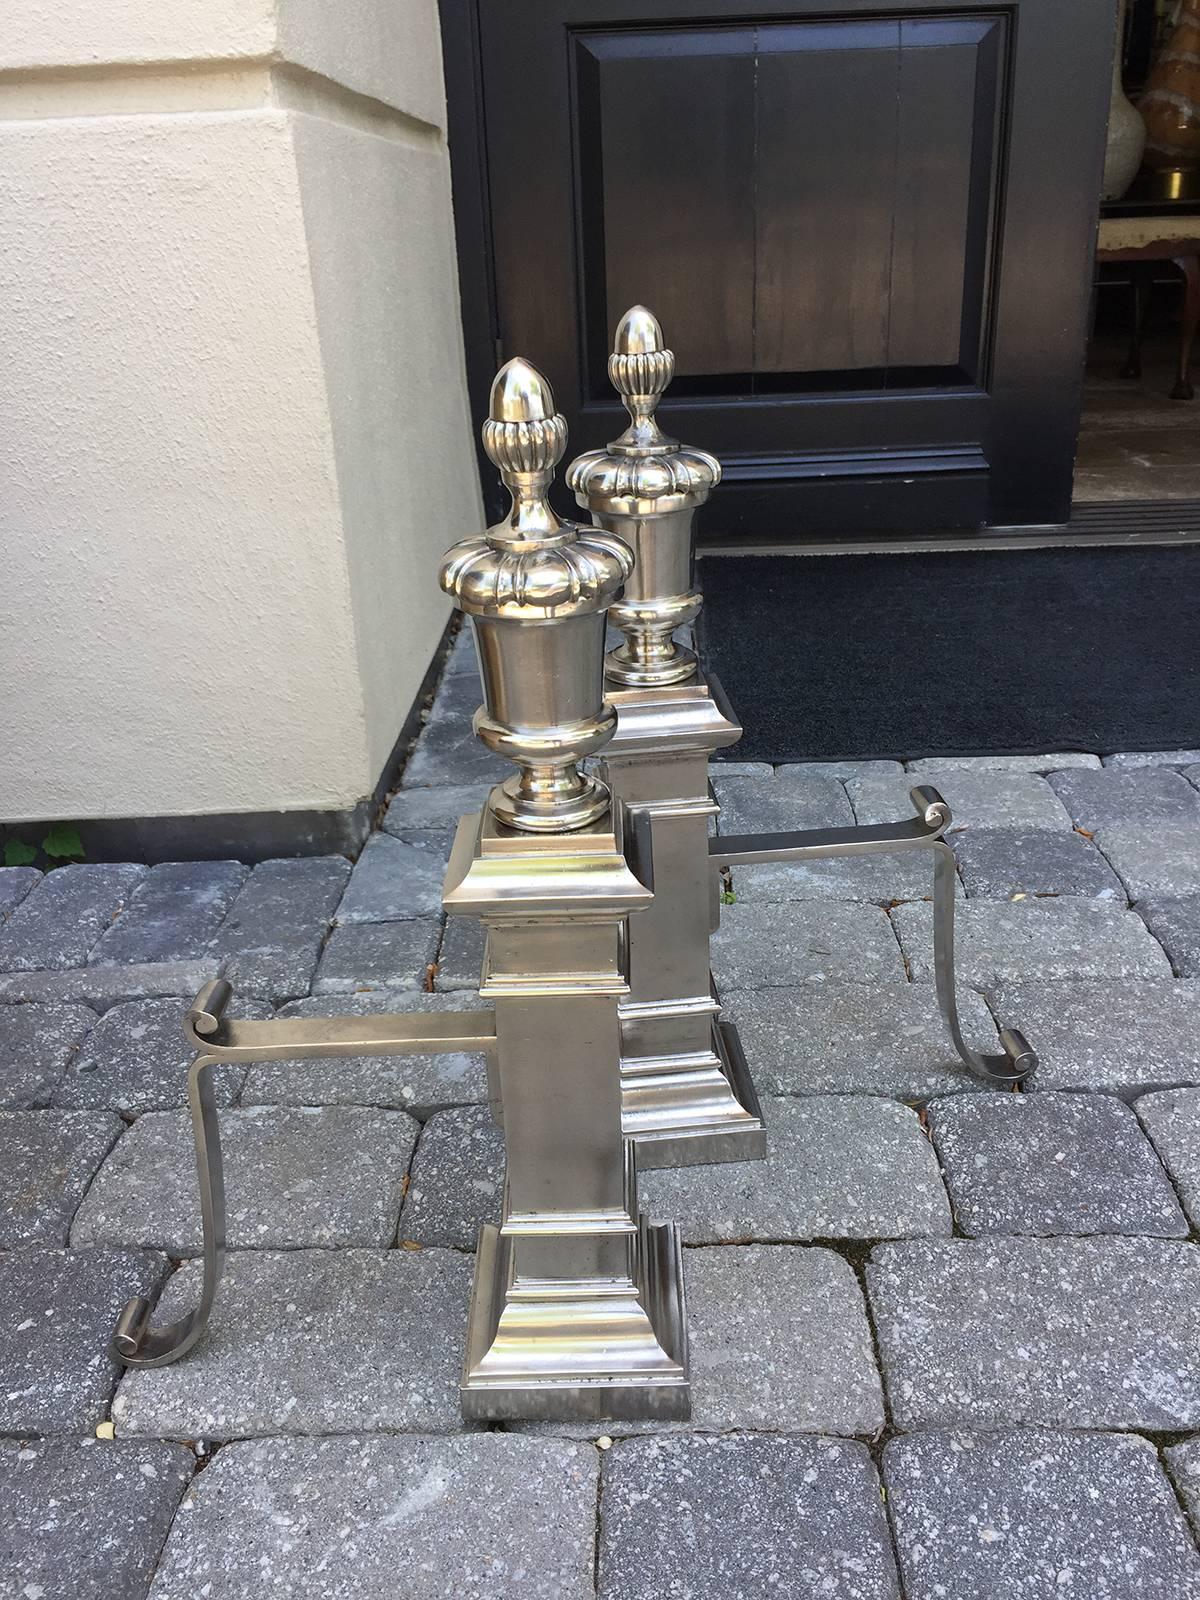 Early 20th Century American Polished Nickel Neoclassical Andirons, circa 1900